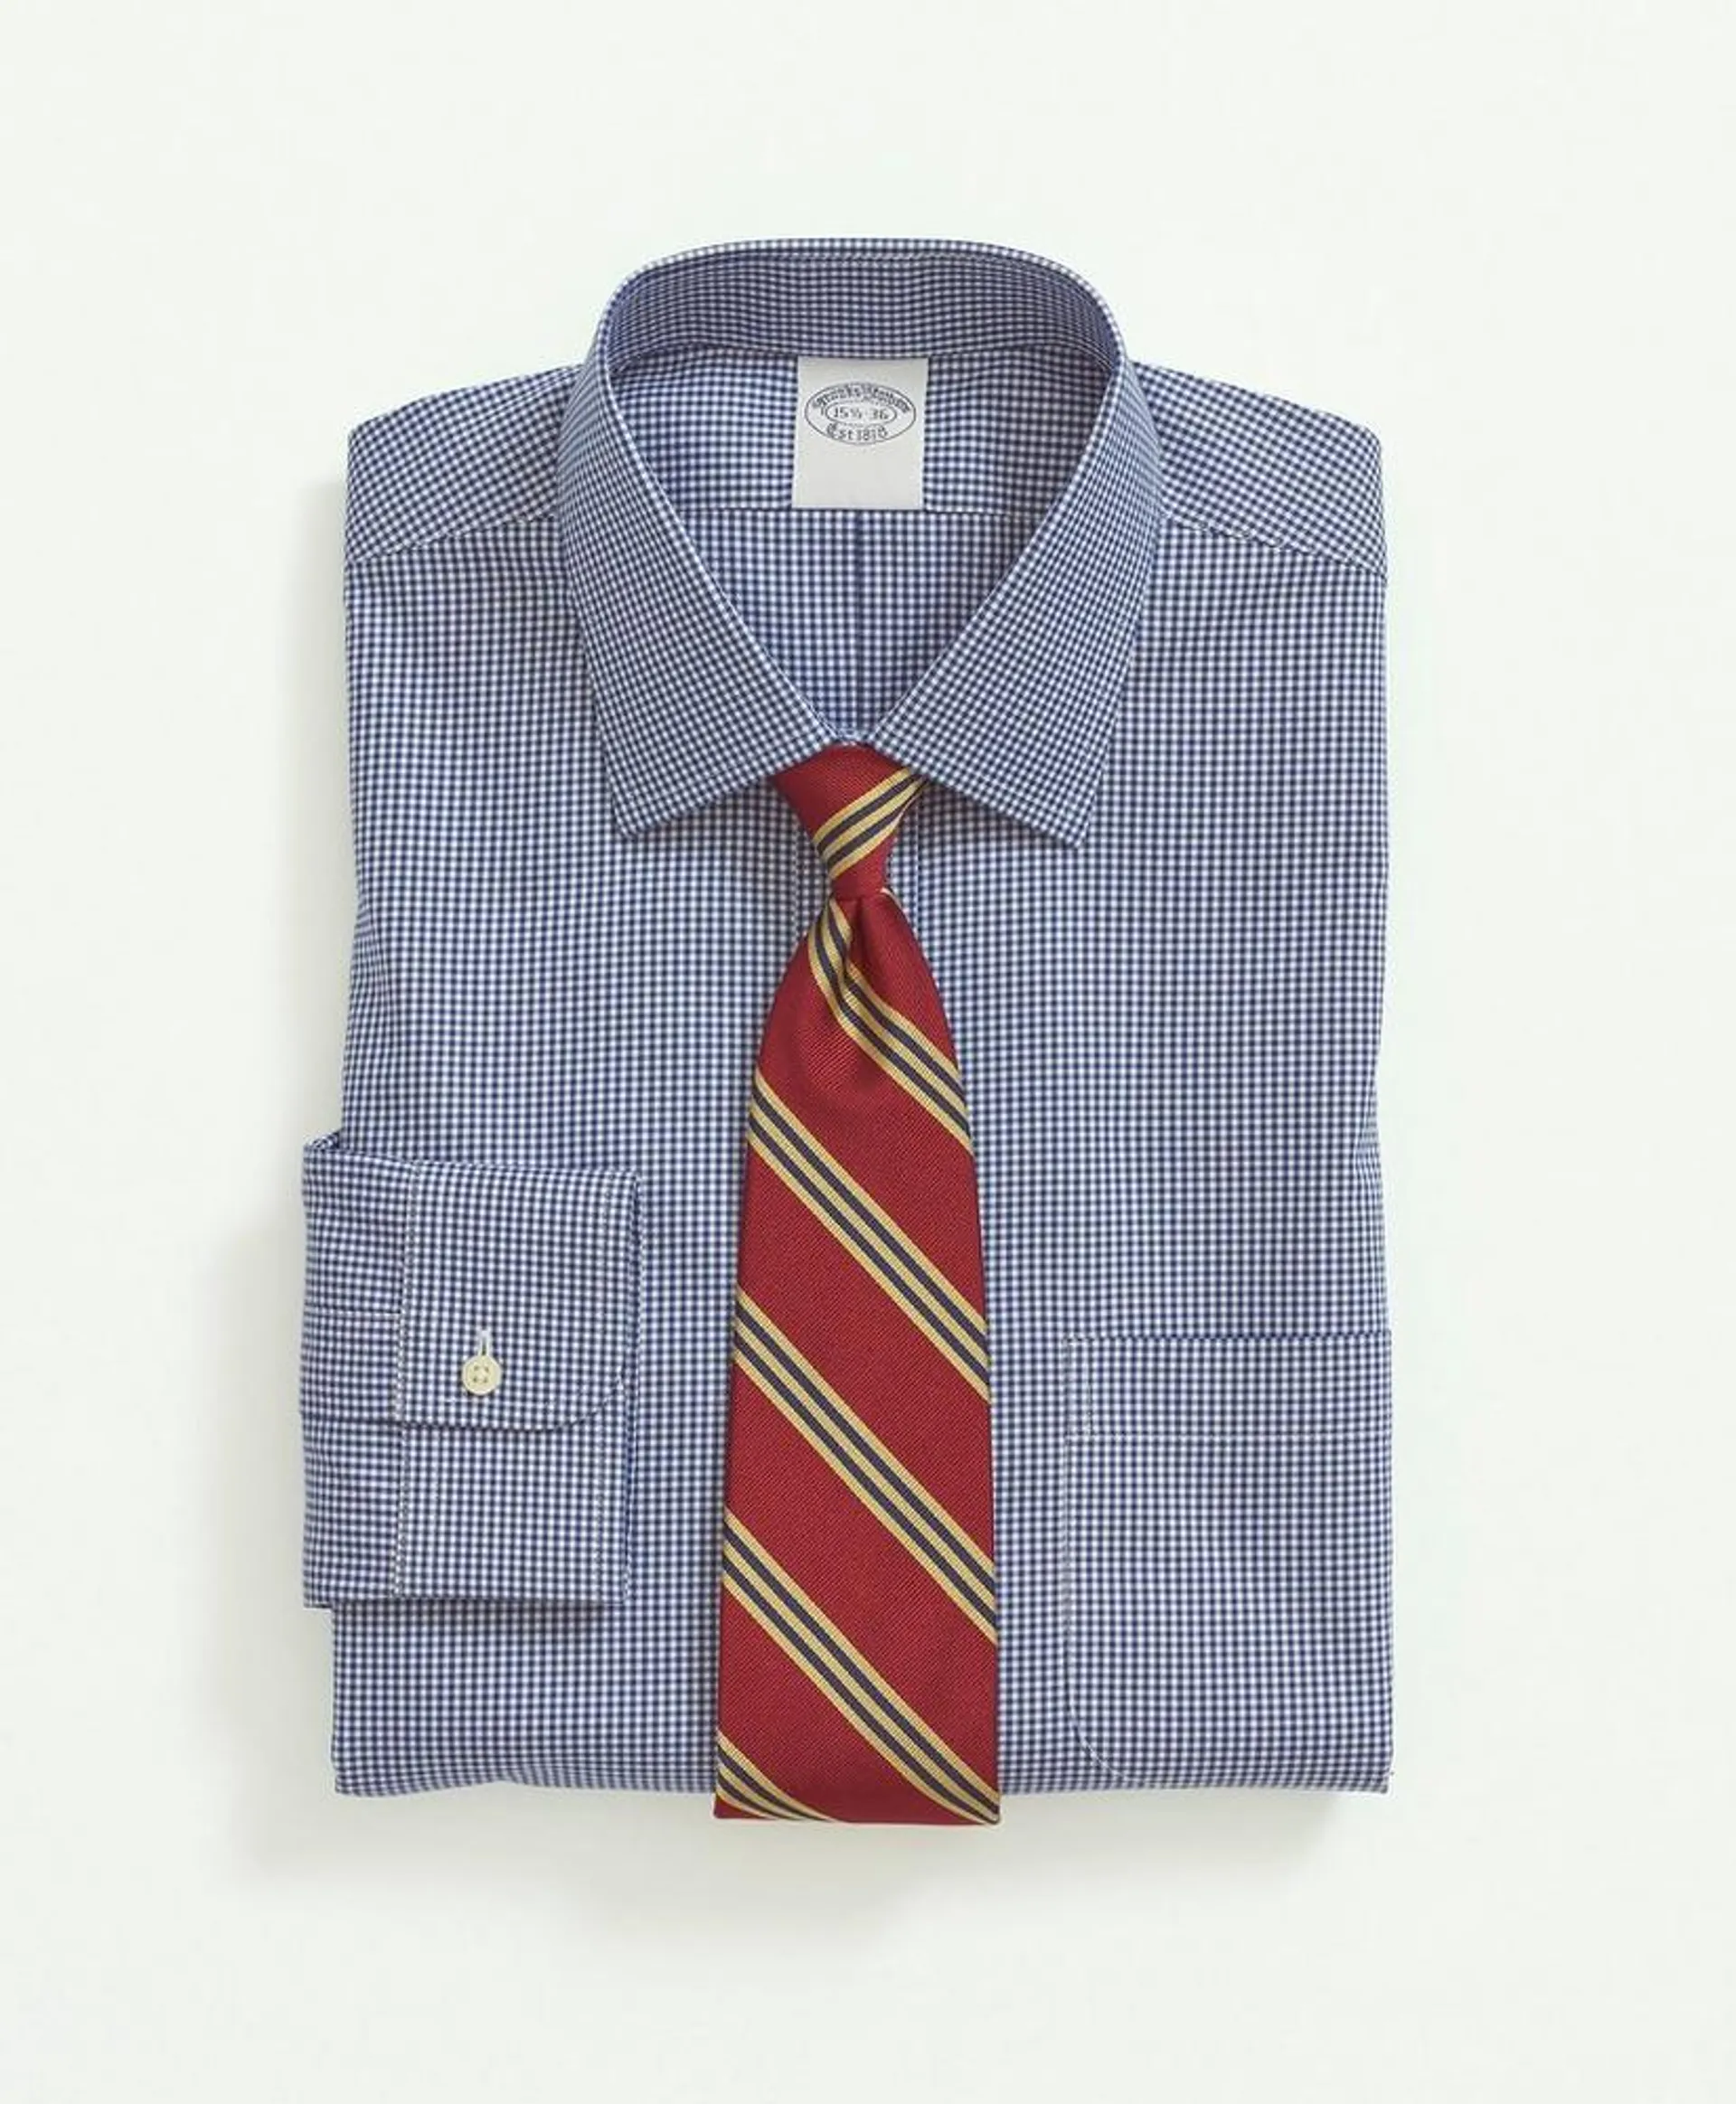 Cotton Non-Iron Pinpoint Oxford Ainsley Collar, Gingham Dress Shirt